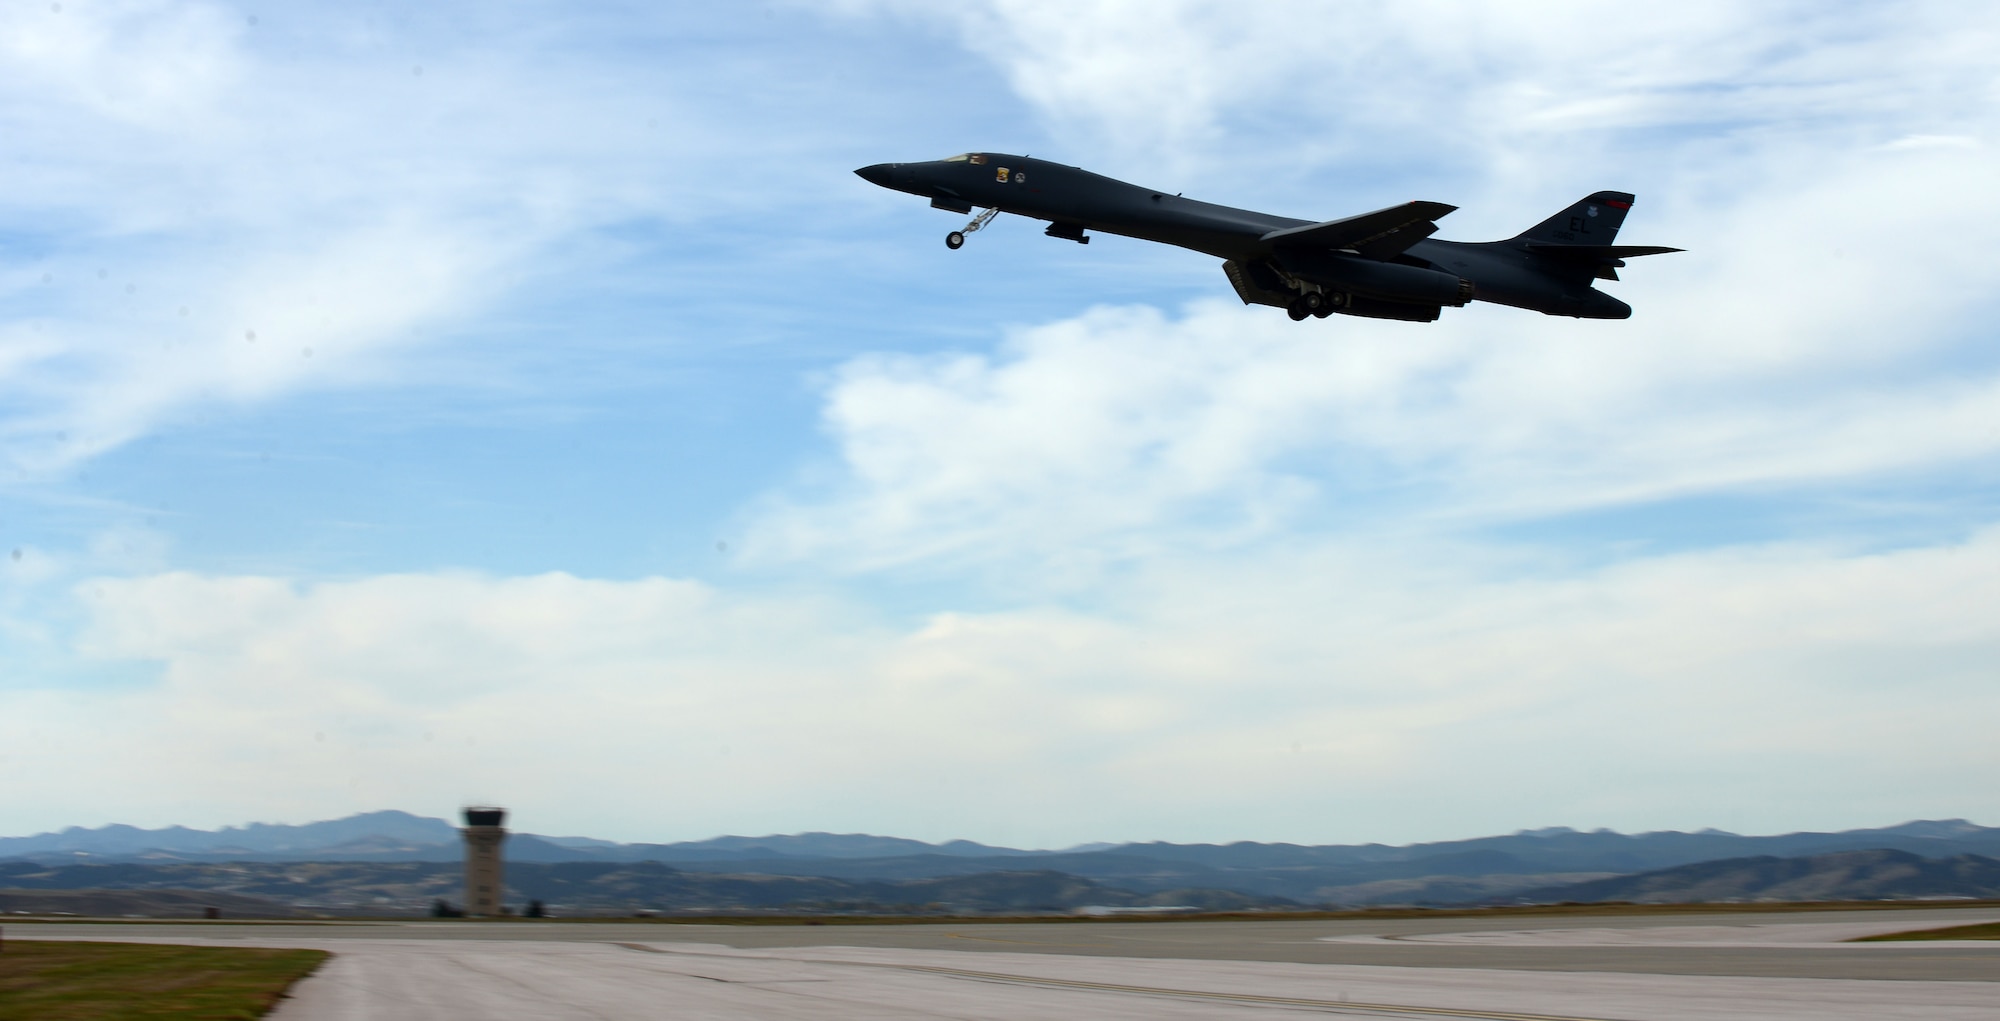 A B-1 bomber takes-off for exercise Combat Raider 18-1 at Ellsworth Air Force Base, S.D., Oct. 11, 2017. The purpose of the exercise is to test cohesion and coordination between multiple aircraft flying within a large simulated combat area to complete a scenario. (U.S. Air Force photo by Airman 1st Class Donald C. Knechtel)